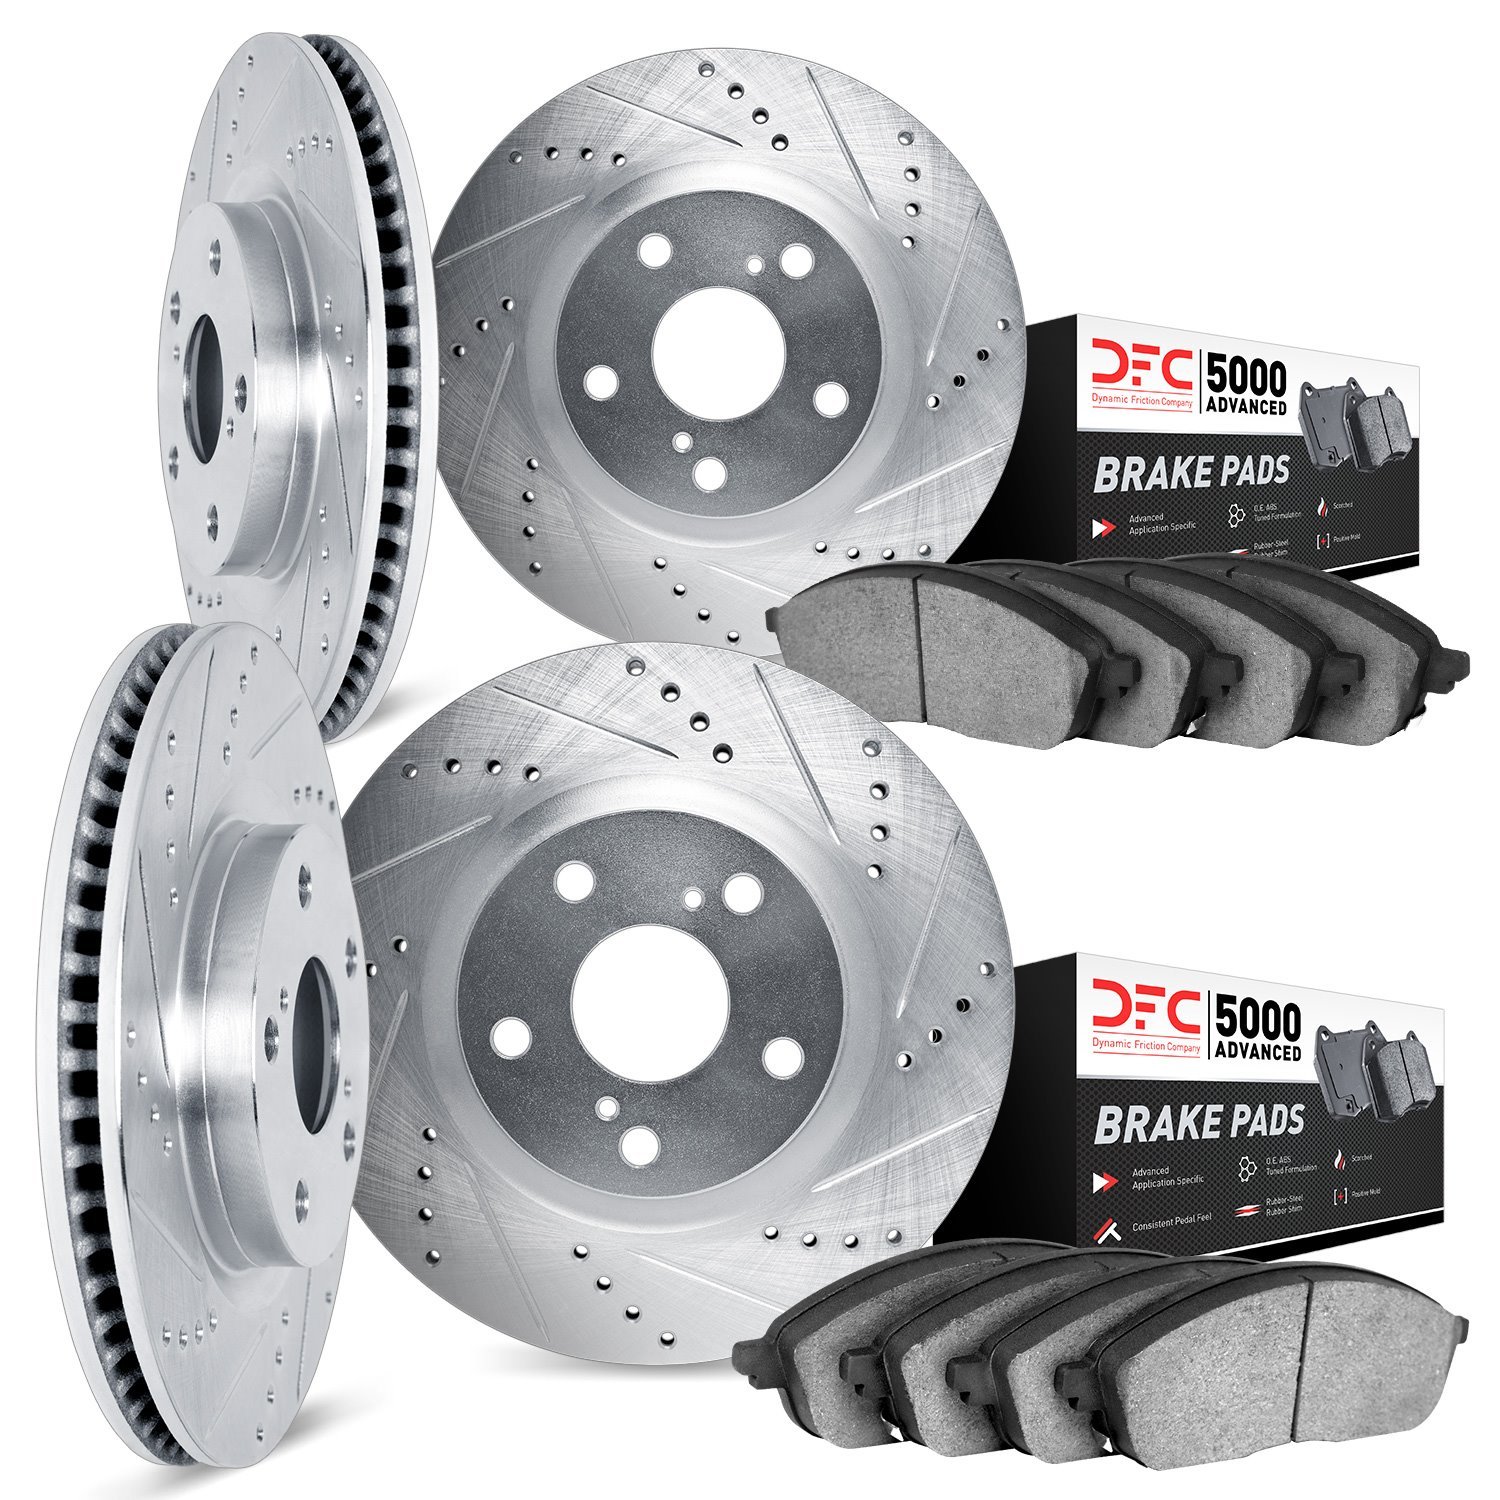 7504-31068 Drilled/Slotted Brake Rotors w/5000 Advanced Brake Pads Kit [Silver], Fits Select Mini, Position: Front and Rear